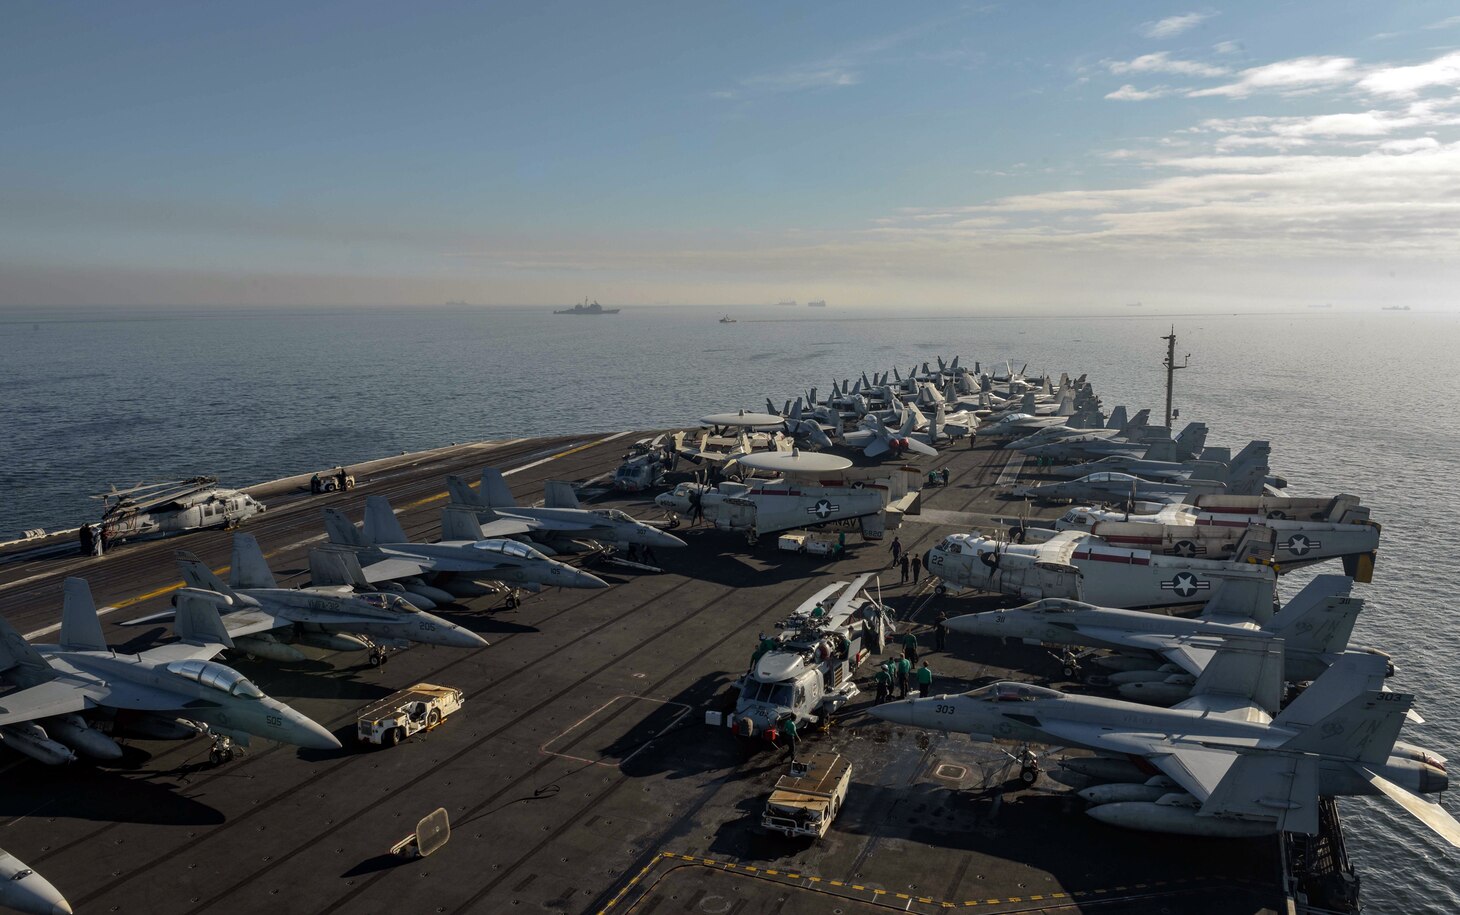 MANILA, Republic of the Philippines (April 11, 2018) The aircraft carrier USS Theodore Roosevelt (CVN 71) anchors off the coast of Manila, Republic of the Philippines for a scheduled port visit.  Theodore Roosevelt is deployed in the U.S. 7th Fleet area of operations in support of maritime security operations and theater security cooperation efforts.